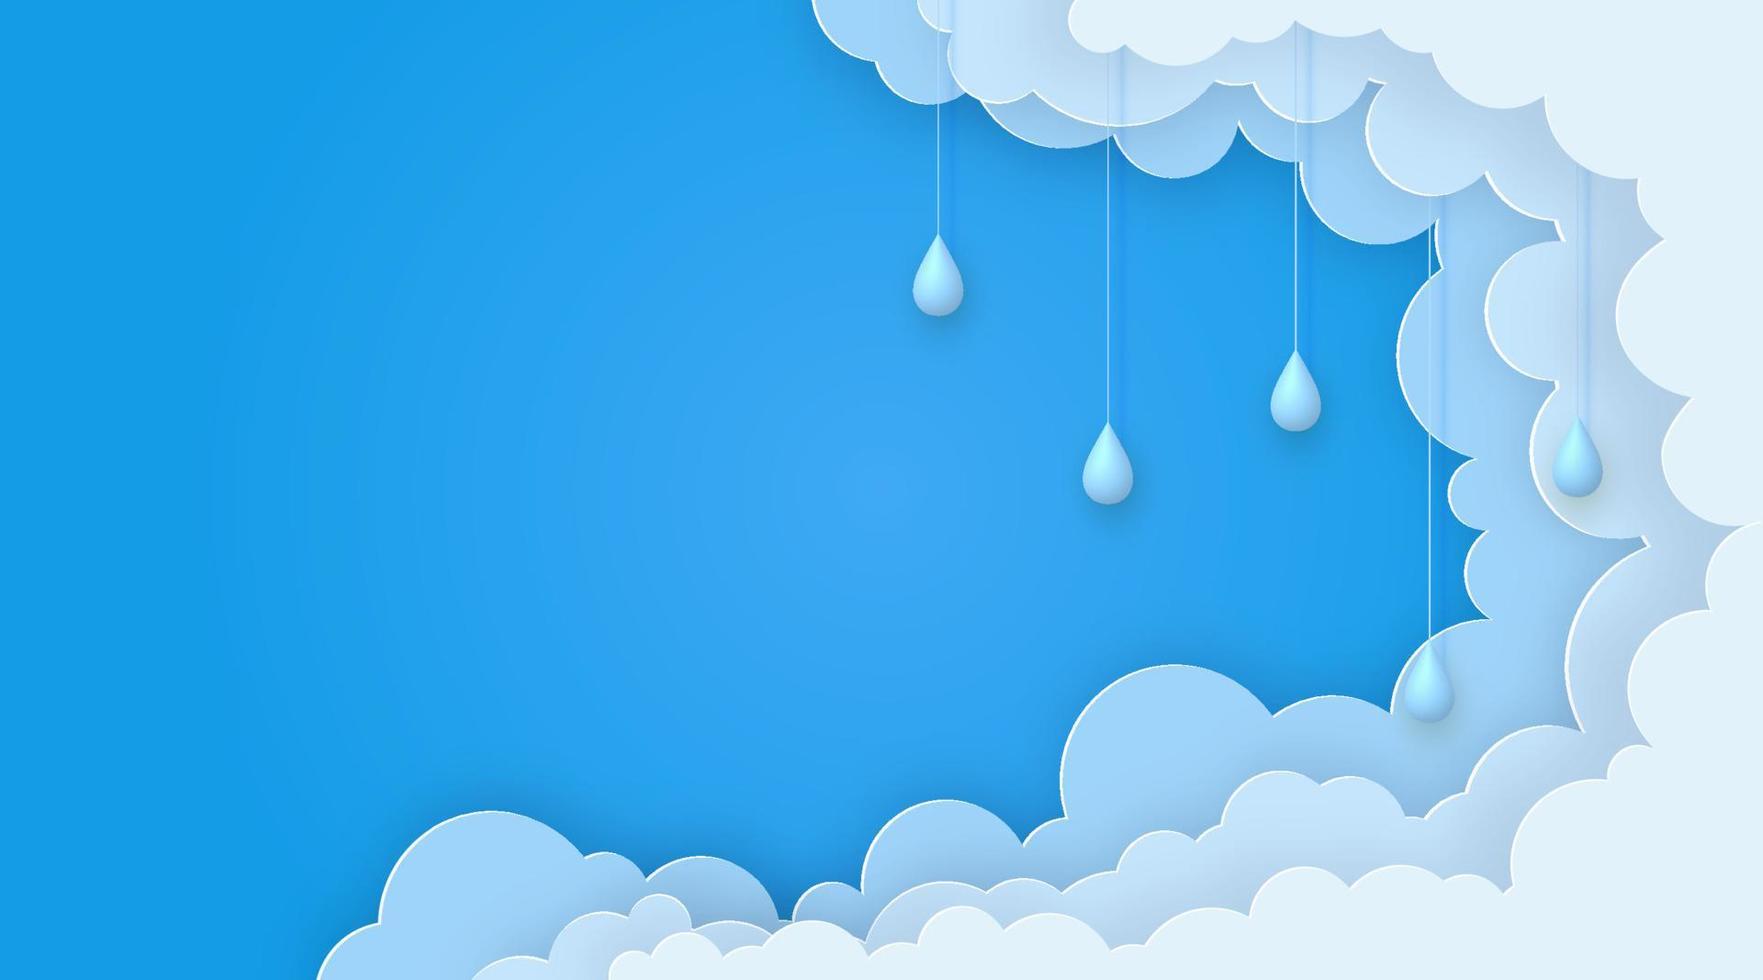 Cute summer banner with paper clouds and 3d raindrops on blue sky background. vector